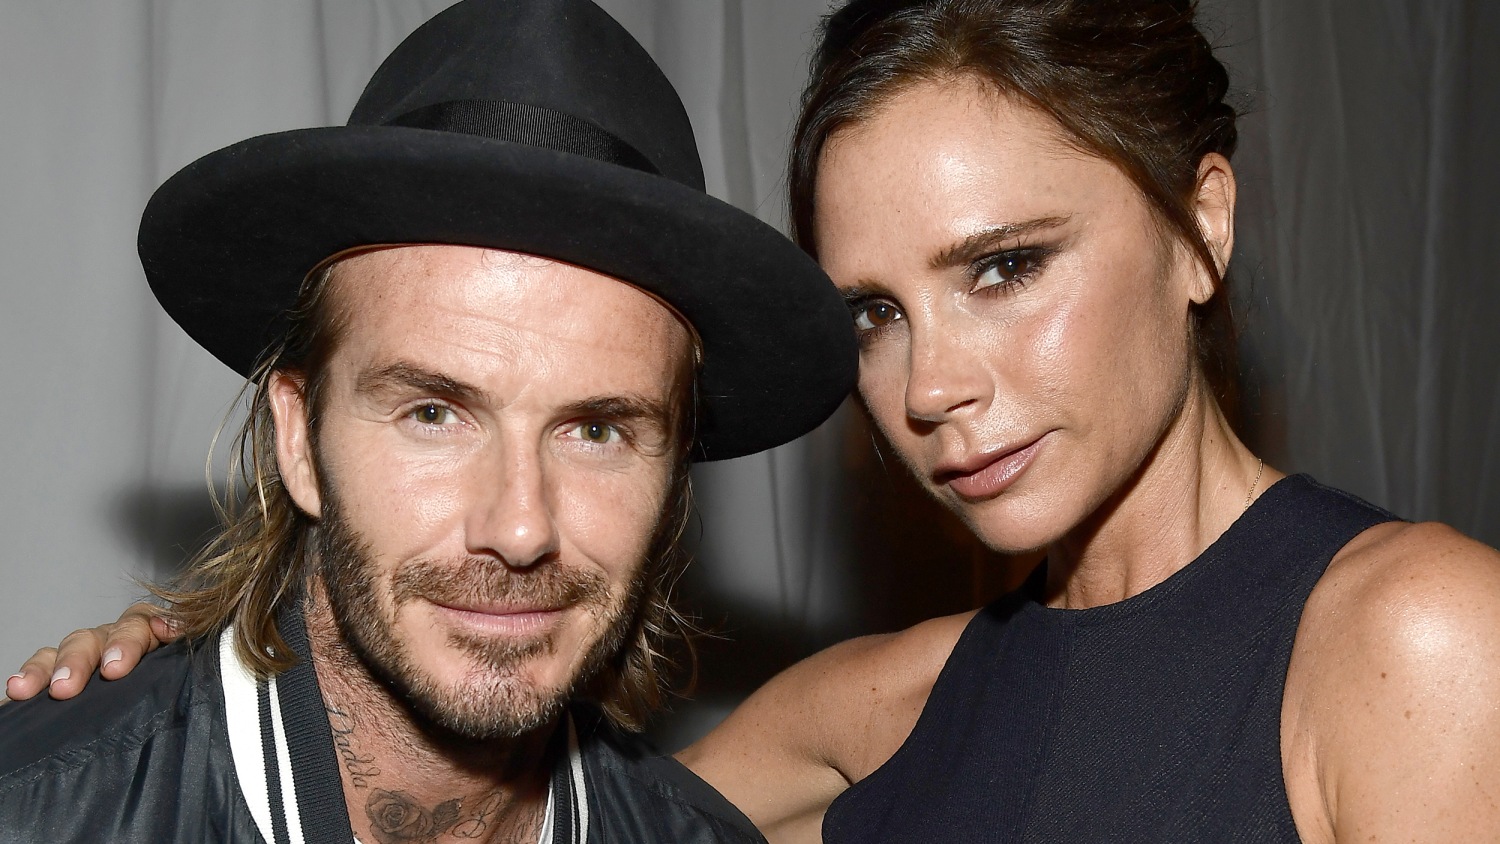 Victoria Beckham Shares Pic of David Beckham Fixing His TV in His Underwear